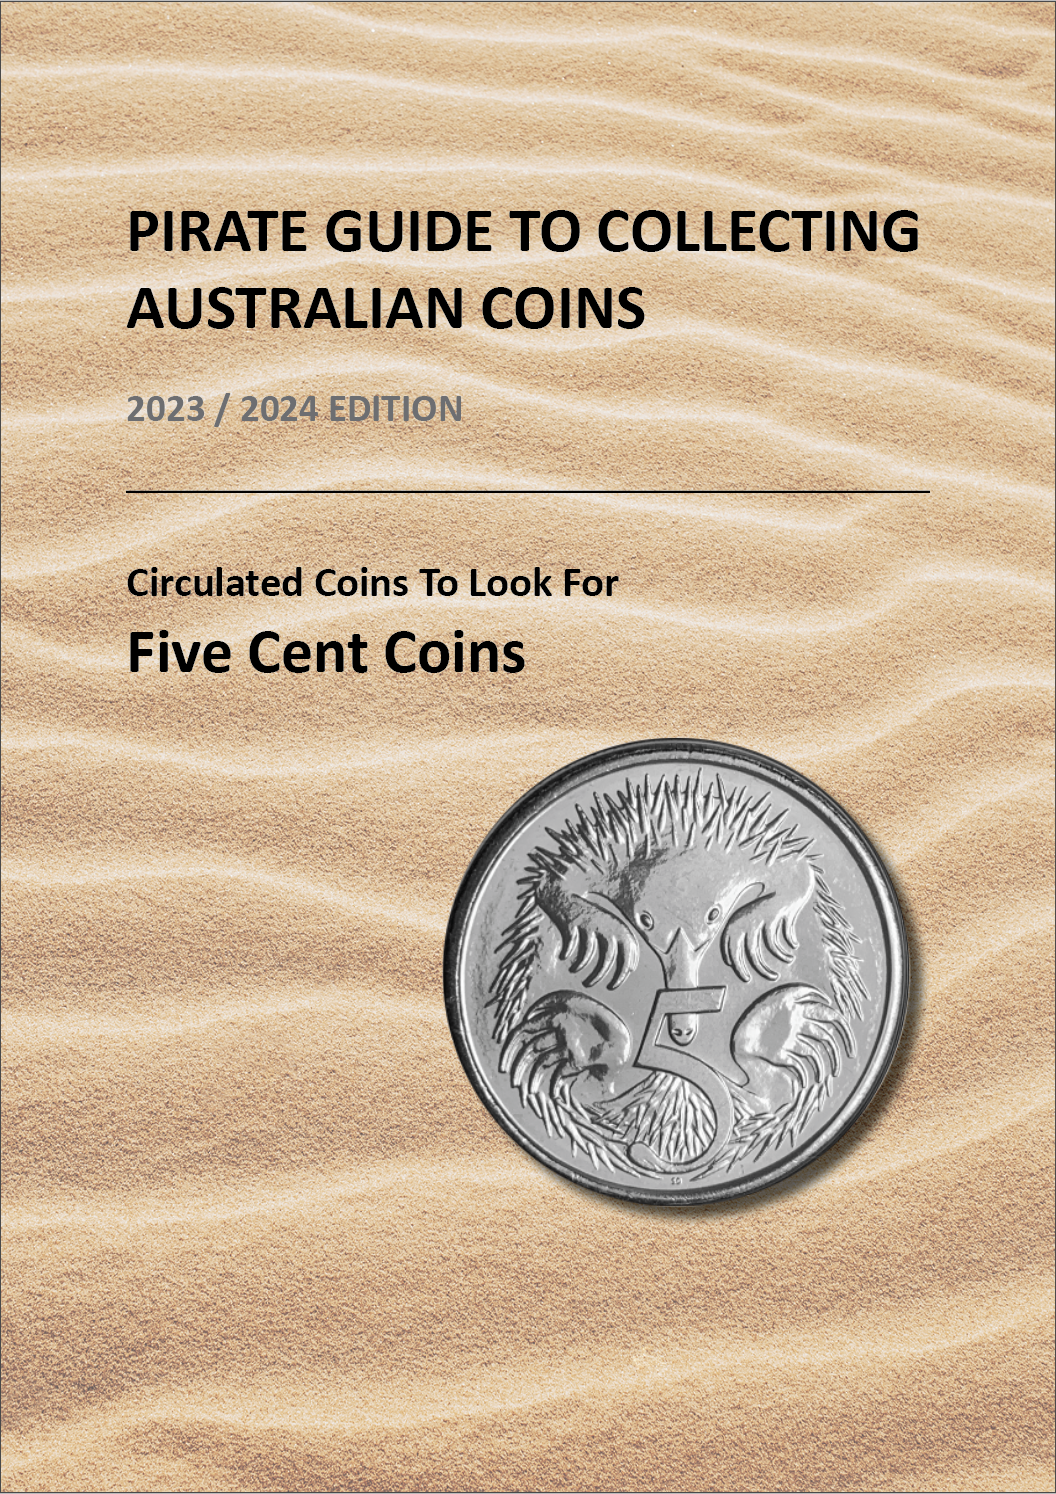 Pirate Guide to Collecting Australian Coins DIGITAL eBook 2023-2024 edition